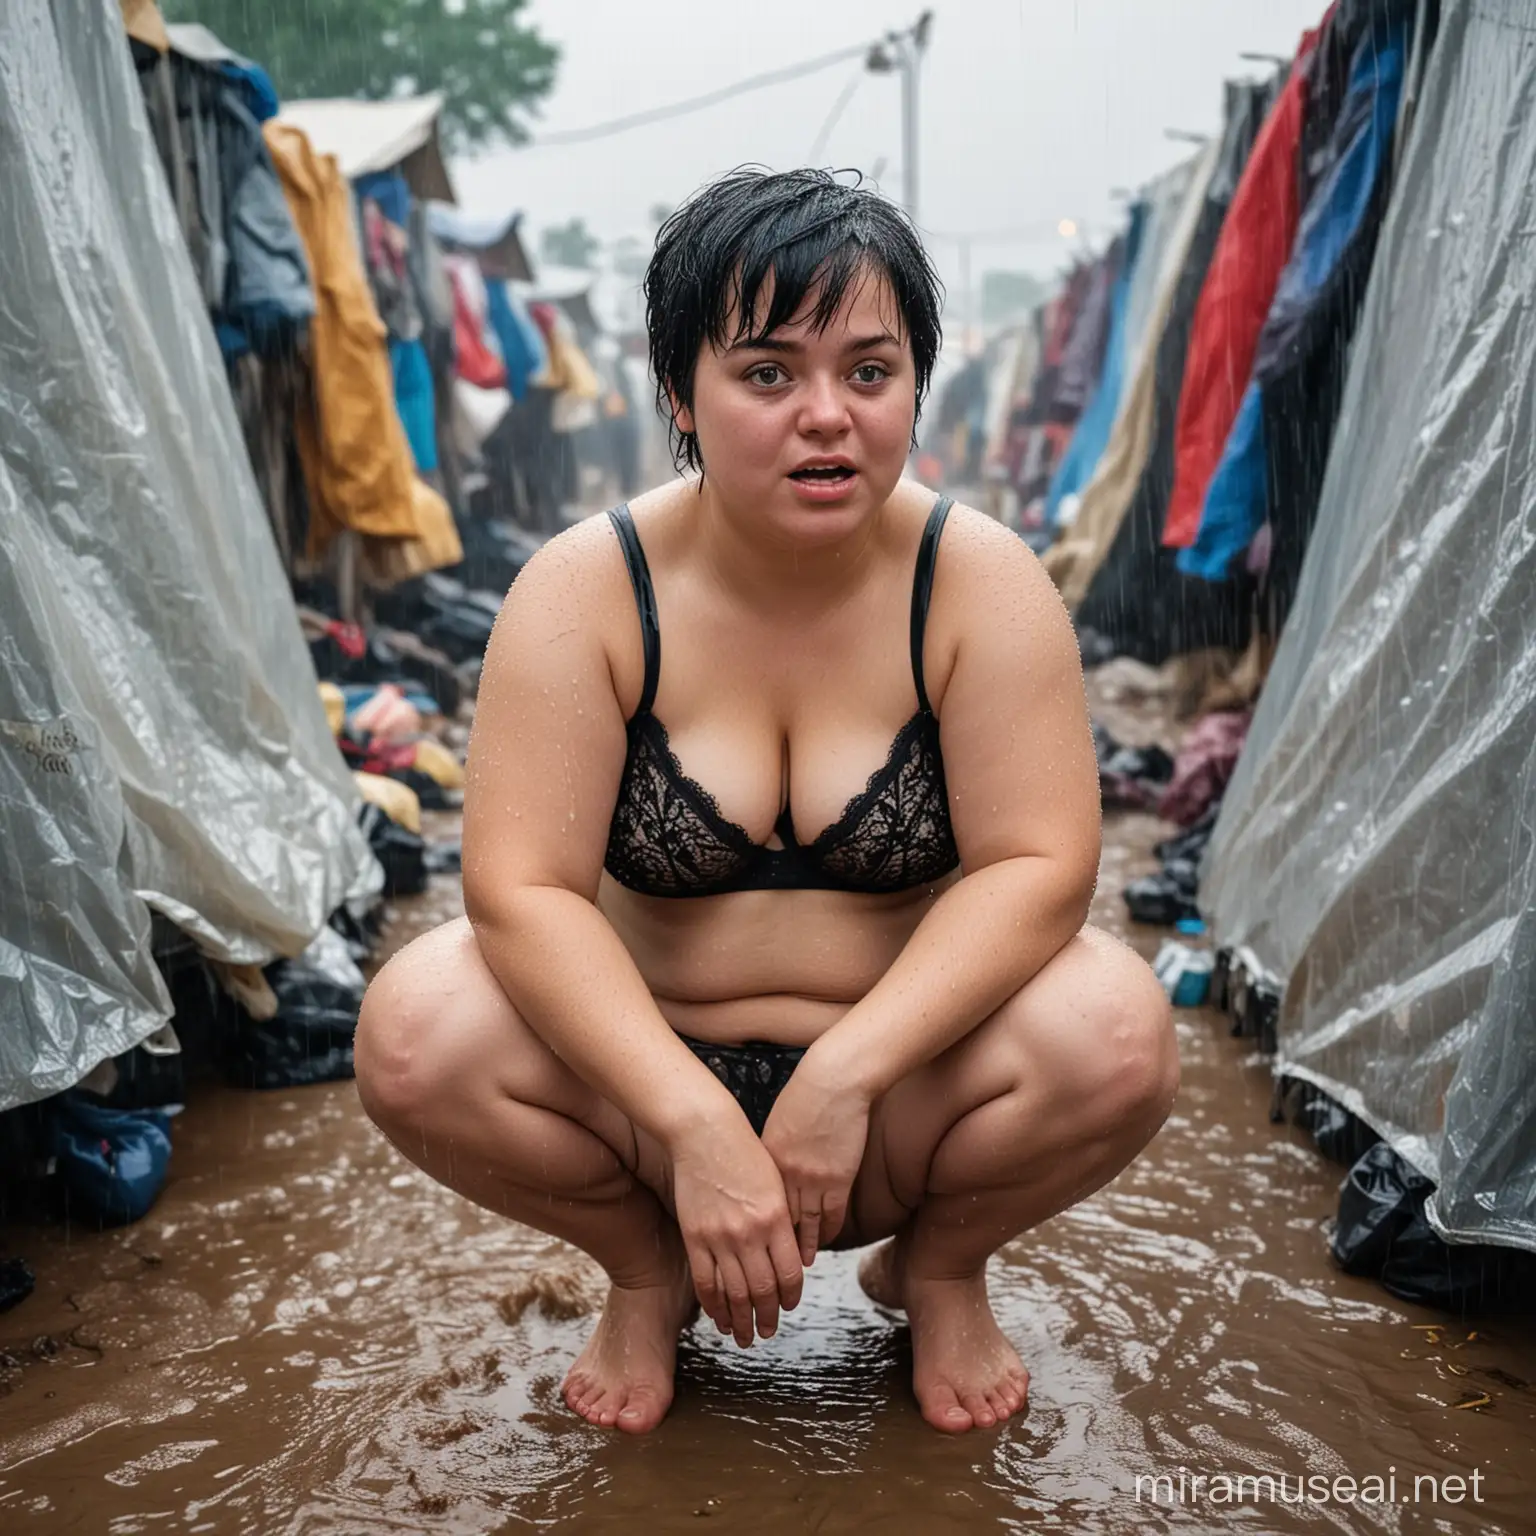 A chubby Down Syndrome woman with short black hair, wearing wet, lacy panties, squatting with legs apart, in a crowded refugee camp, in the rain.